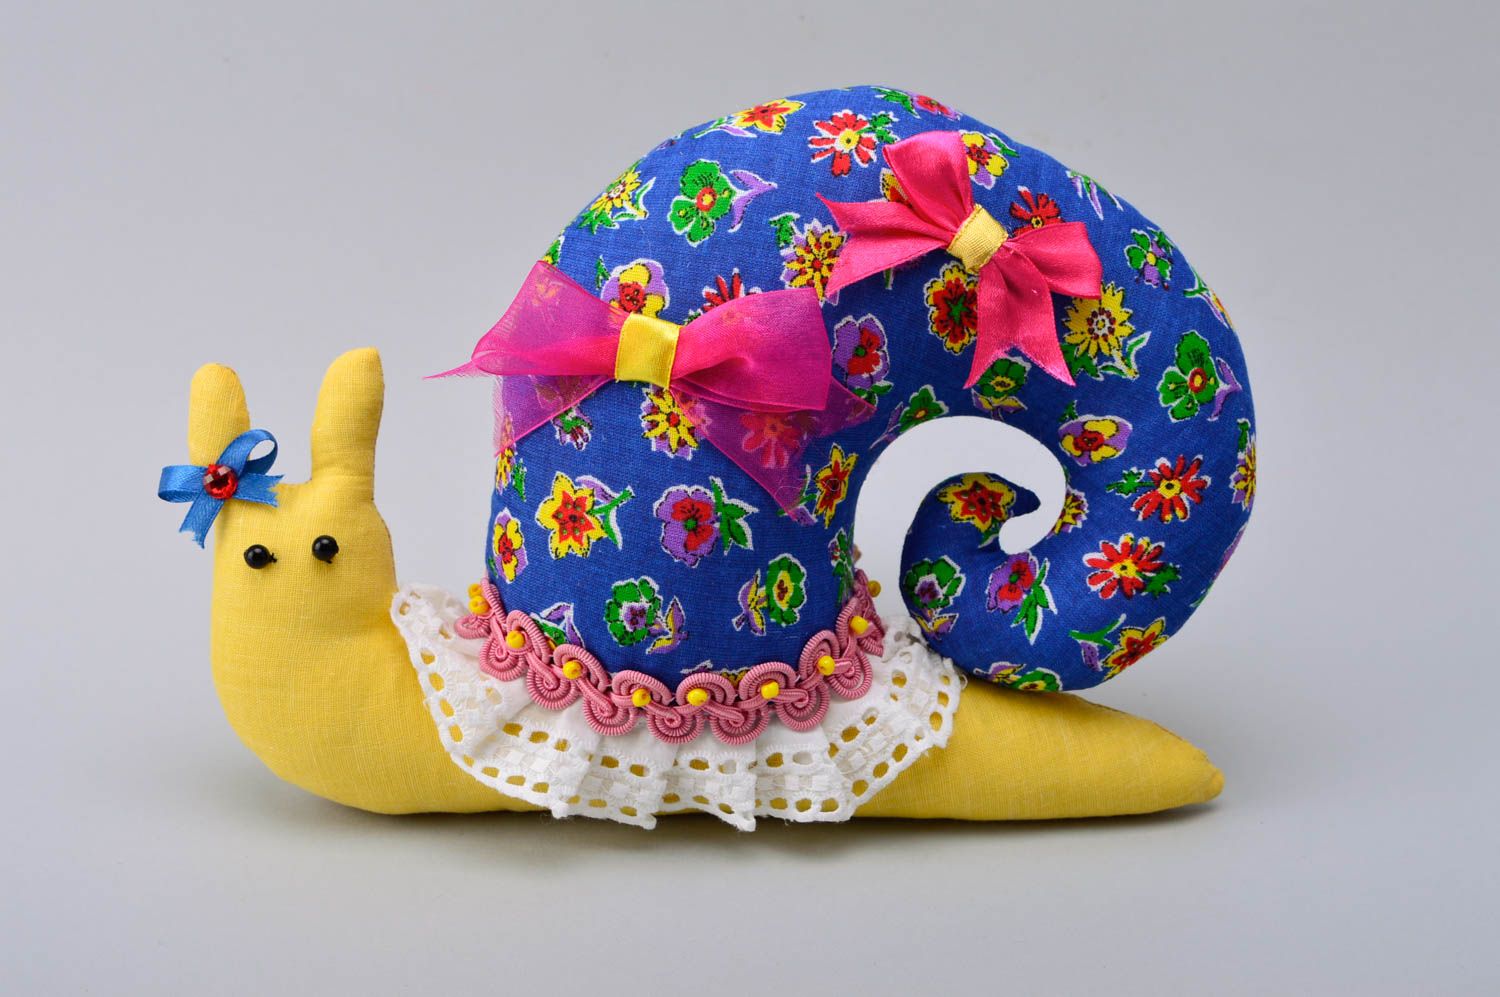 Handmade soft toy snail toy floral fabric stuffed animals birthday gifts for kid photo 2